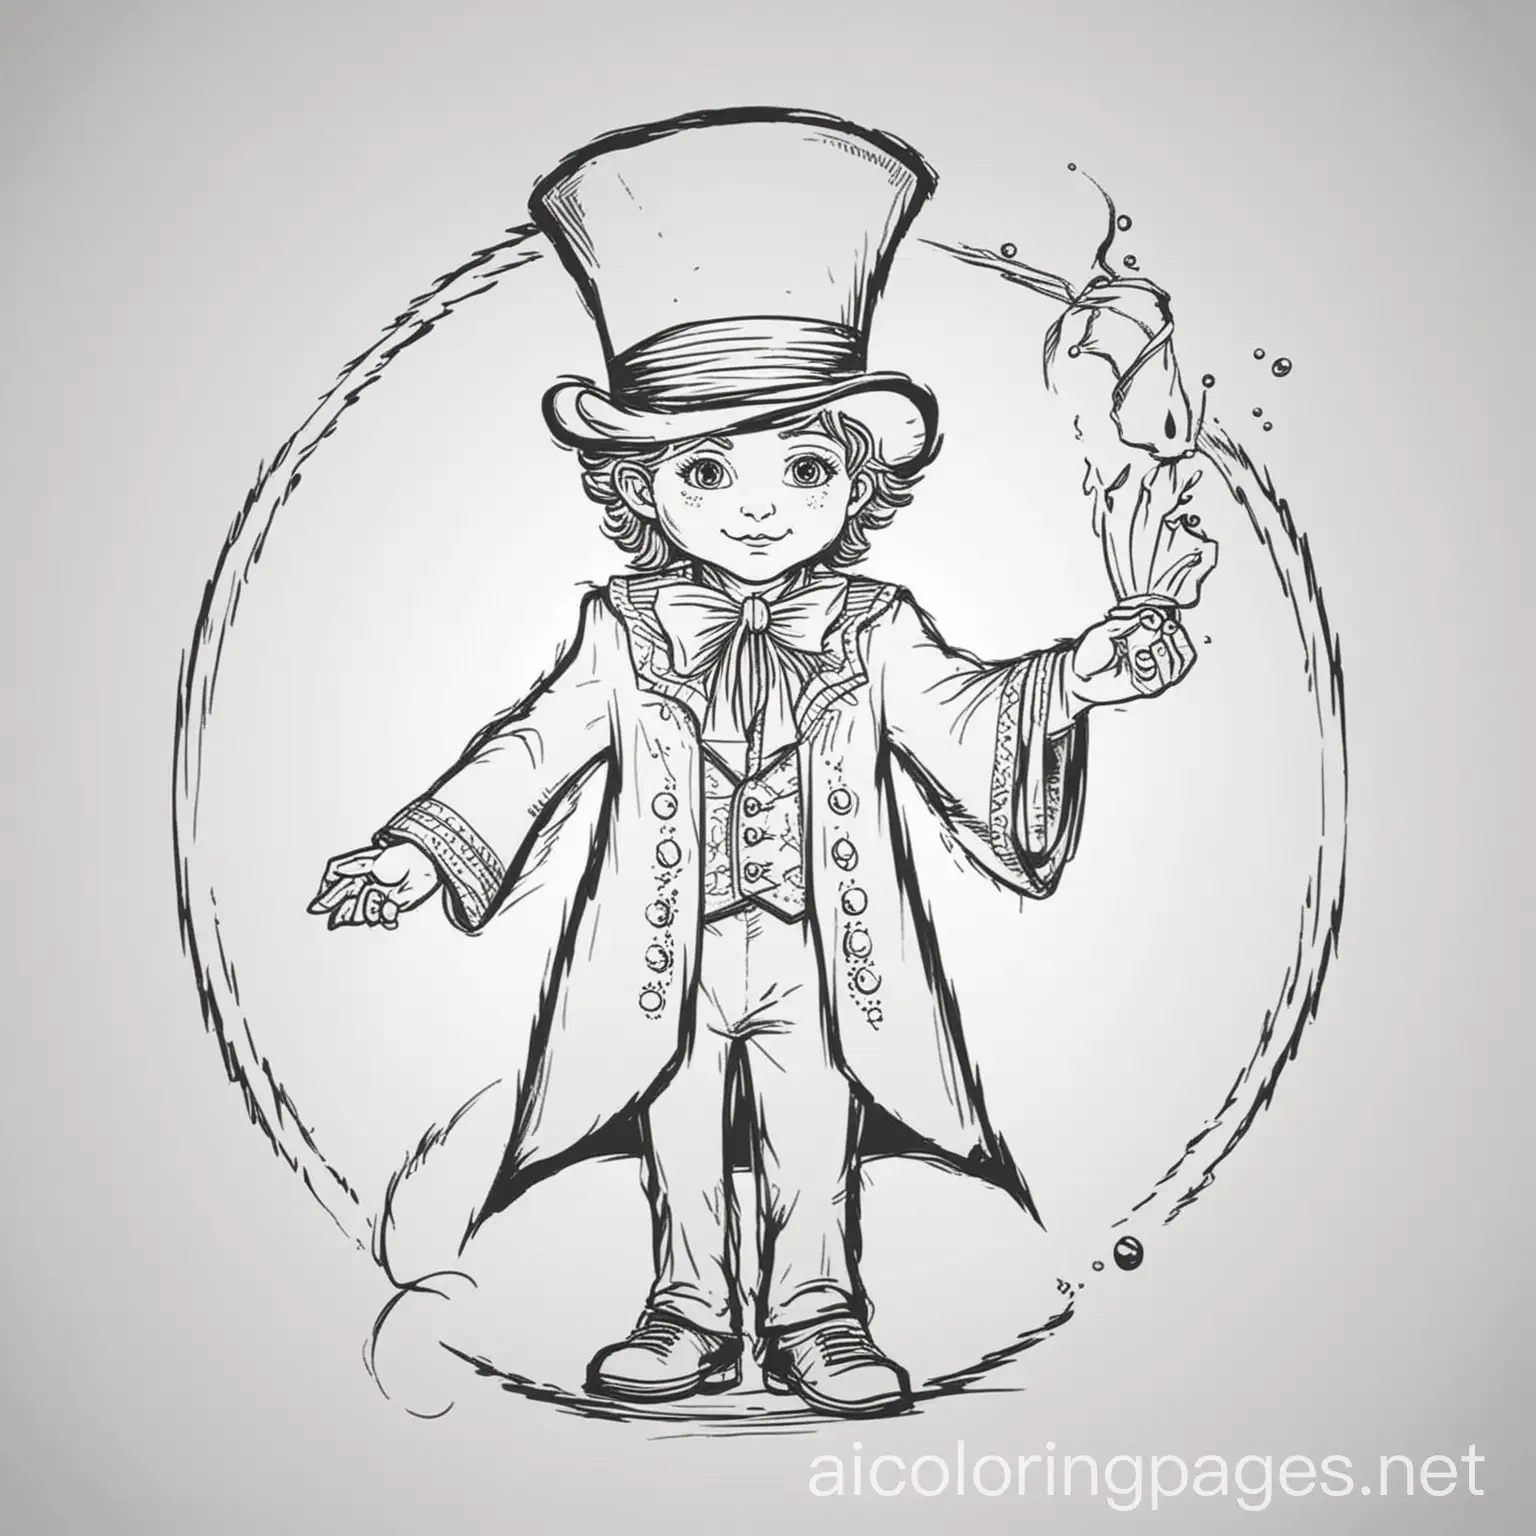 Magician, Coloring Page, black and white, line art, white background, Simplicity, Ample White Space. The background of the coloring page is plain white to make it easy for young children to color within the lines. The outlines of all the subjects are easy to distinguish, making it simple for kids to color without too much difficulty